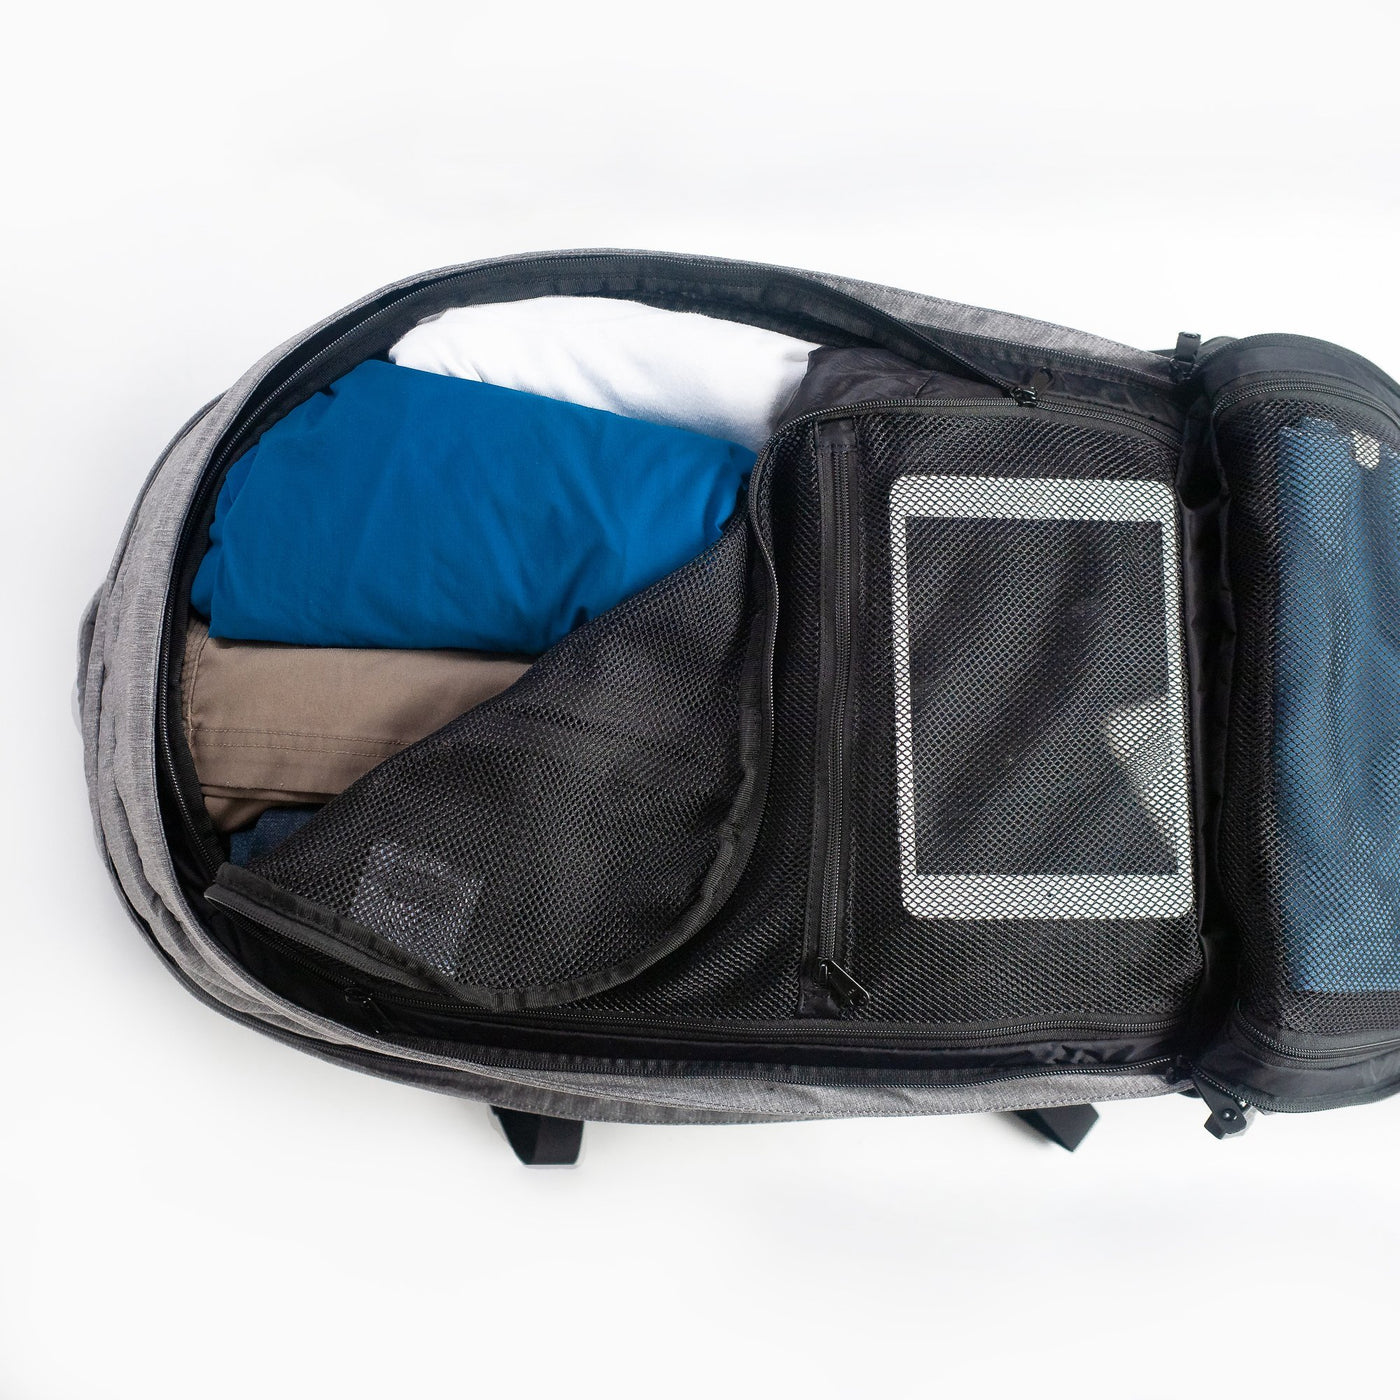 Front Compartment with convenient storage pockets for gear